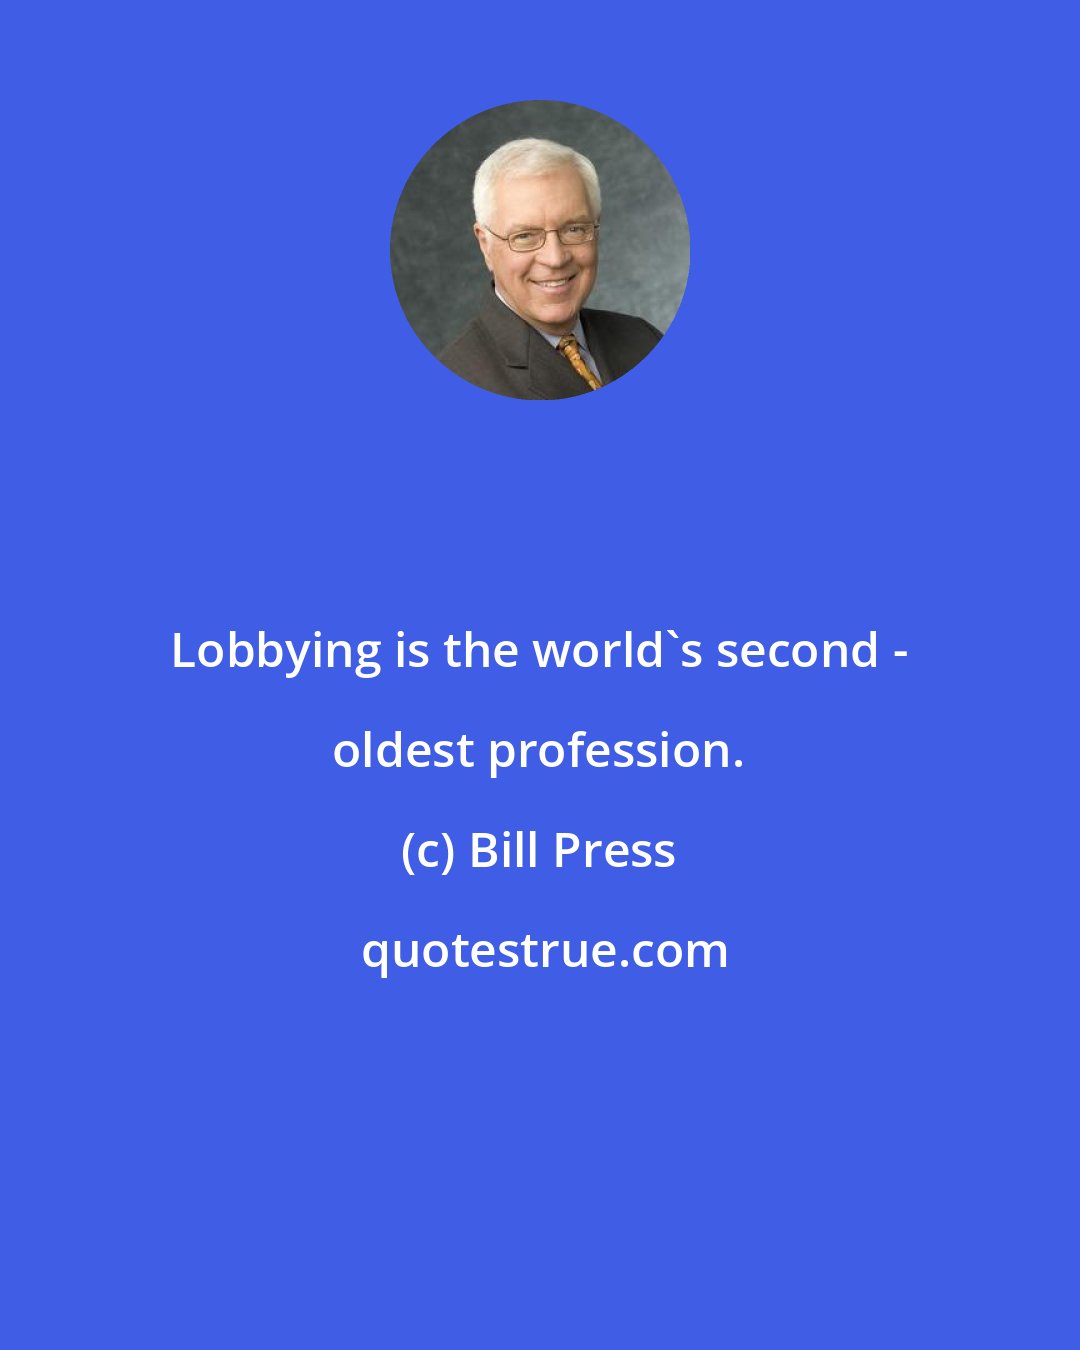 Bill Press: Lobbying is the world's second - oldest profession.